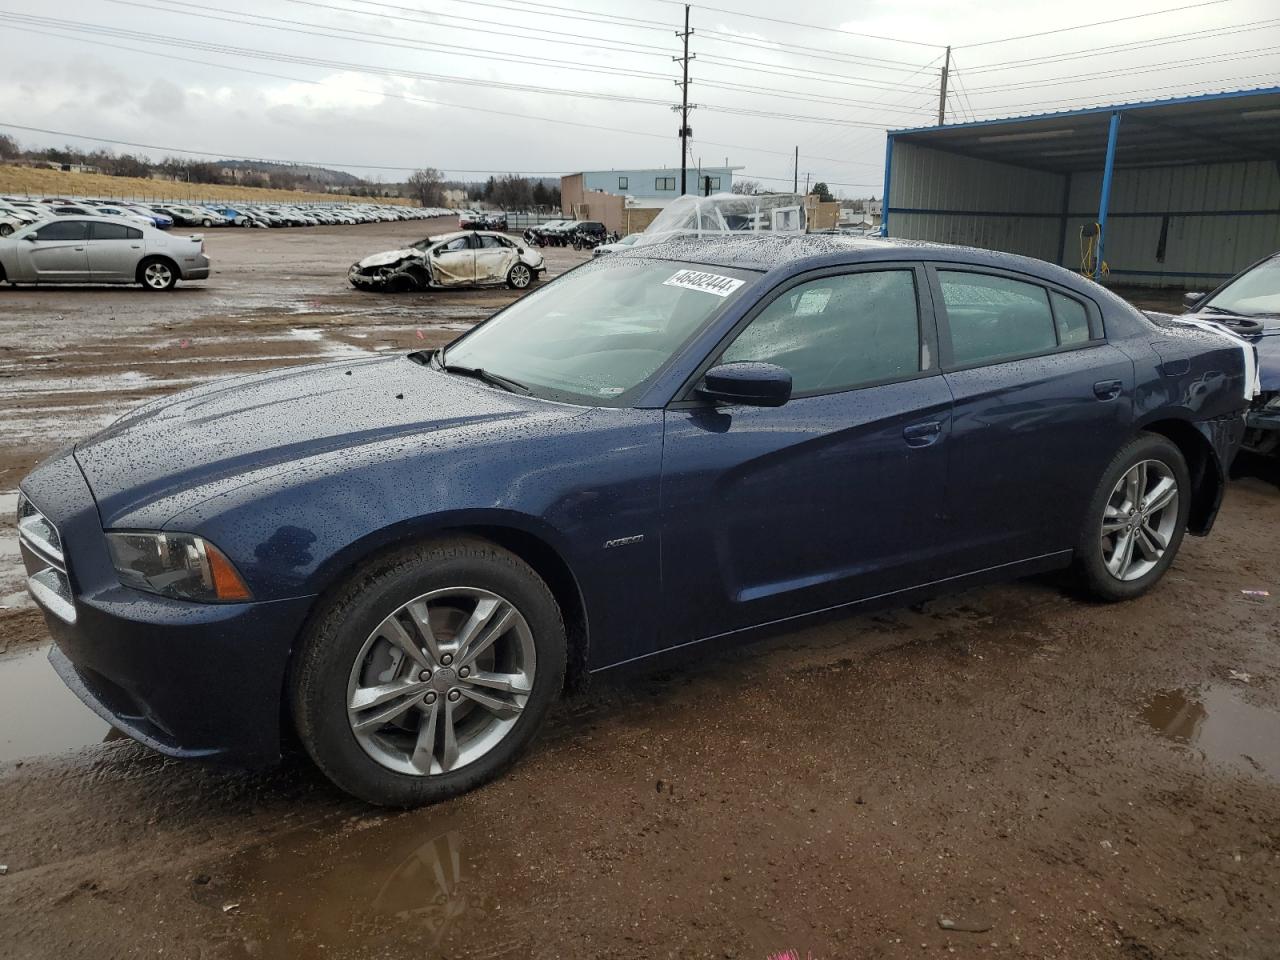 vin: 2C3CDXDT0EH156268 2C3CDXDT0EH156268 2014 dodge charger 5700 for Sale in 80907 5336, Co - Colorado Springs, Colorado Springs, USA